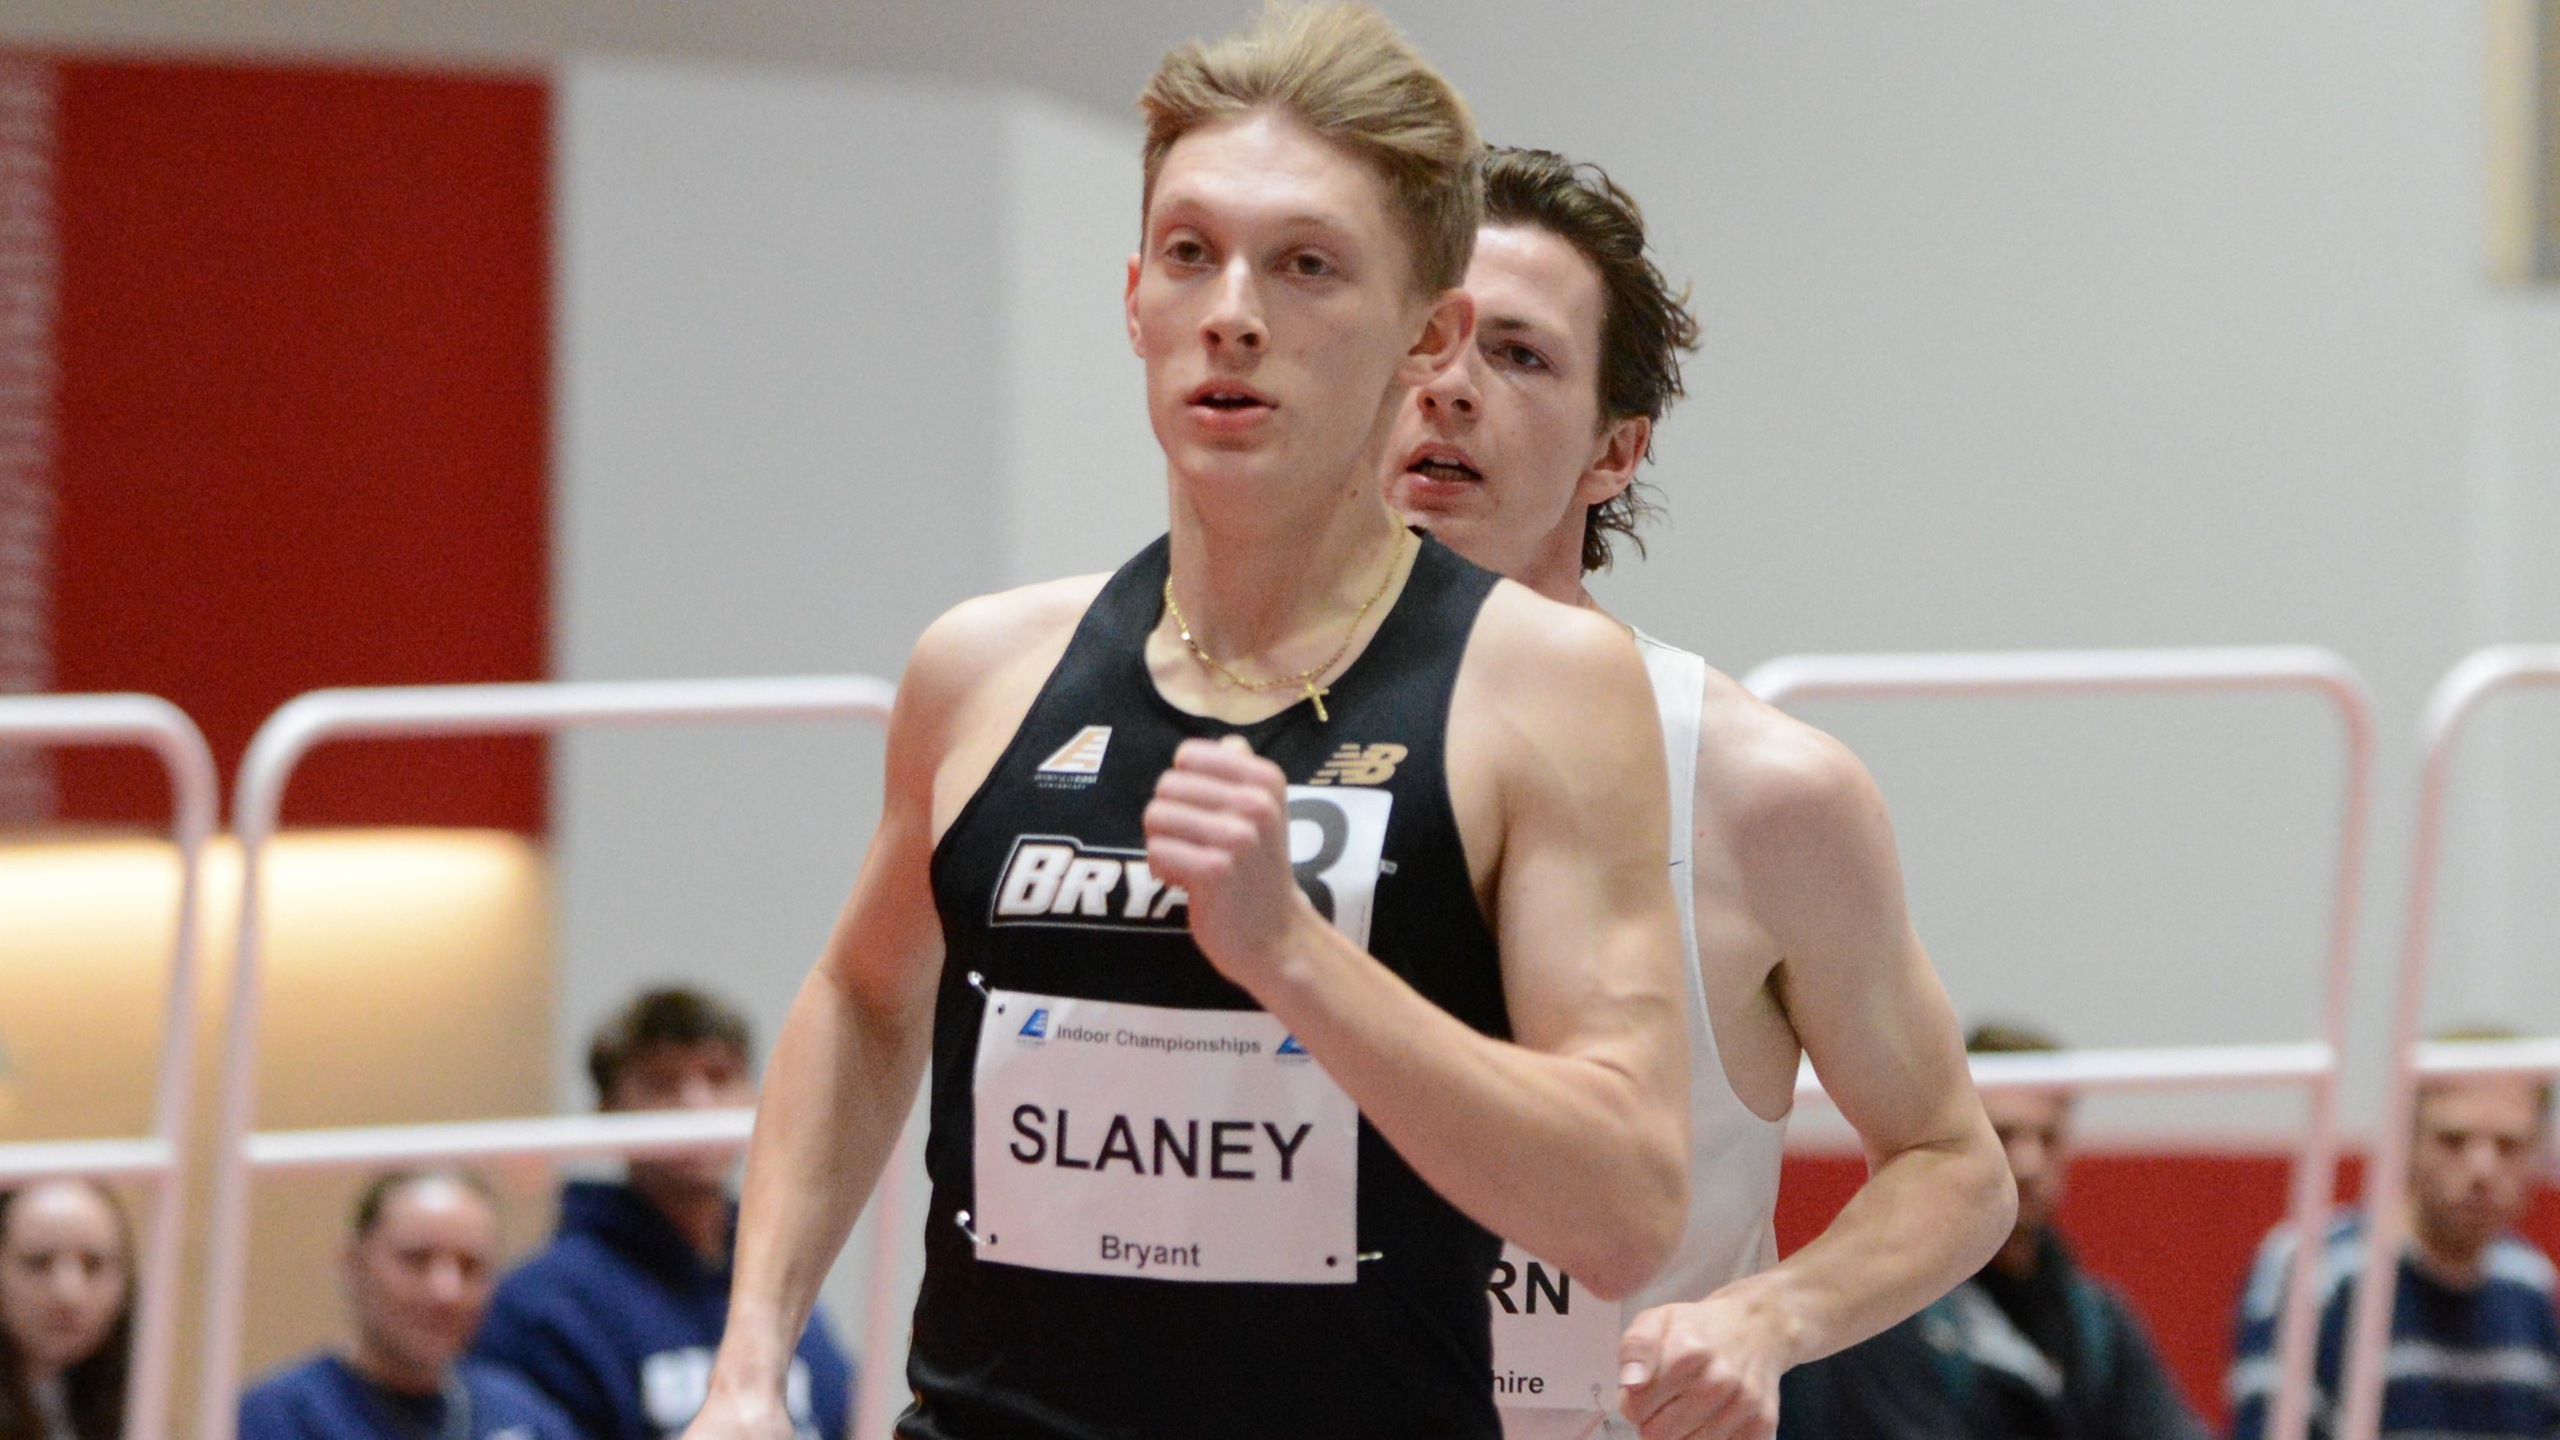 Slaney captures Men's 5k Record with sub 14 minute finish